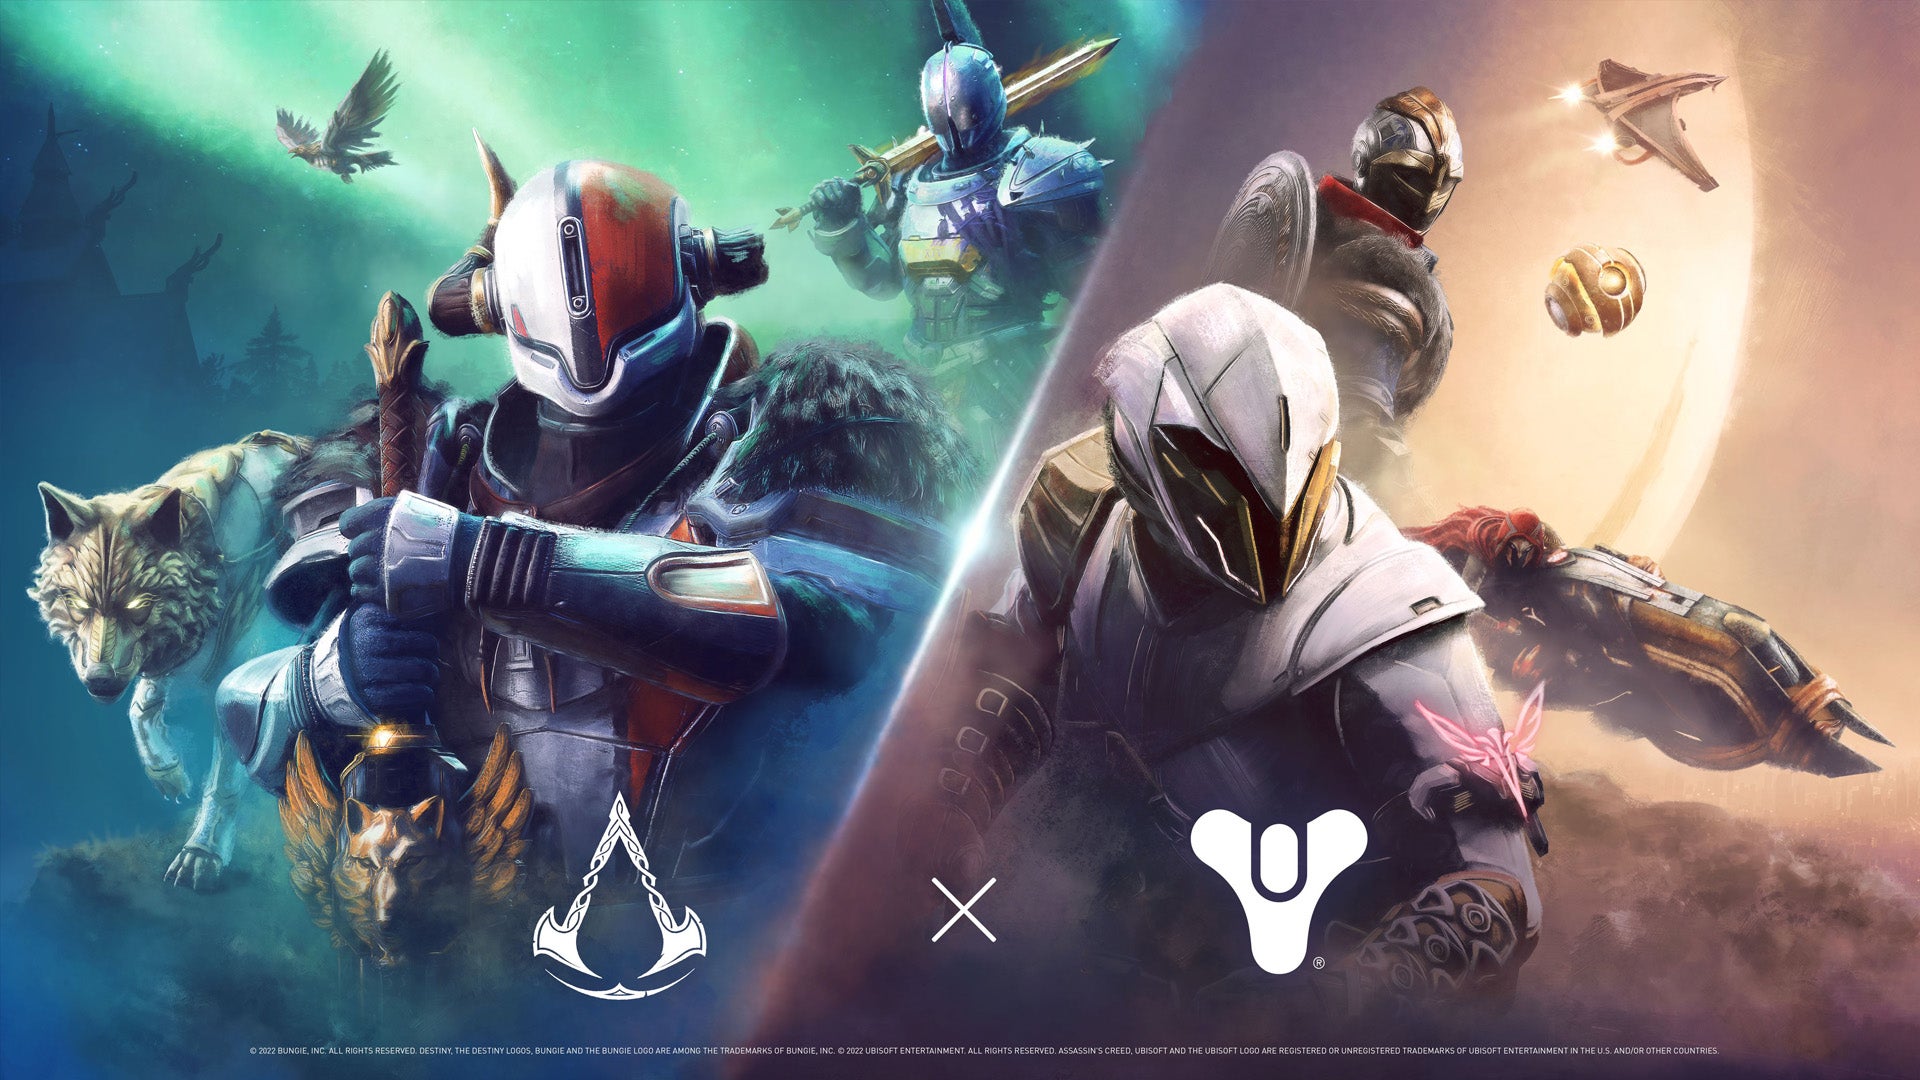 Image for Destiny 2 and Assassin's Creed crossover is a match made in Valhalla